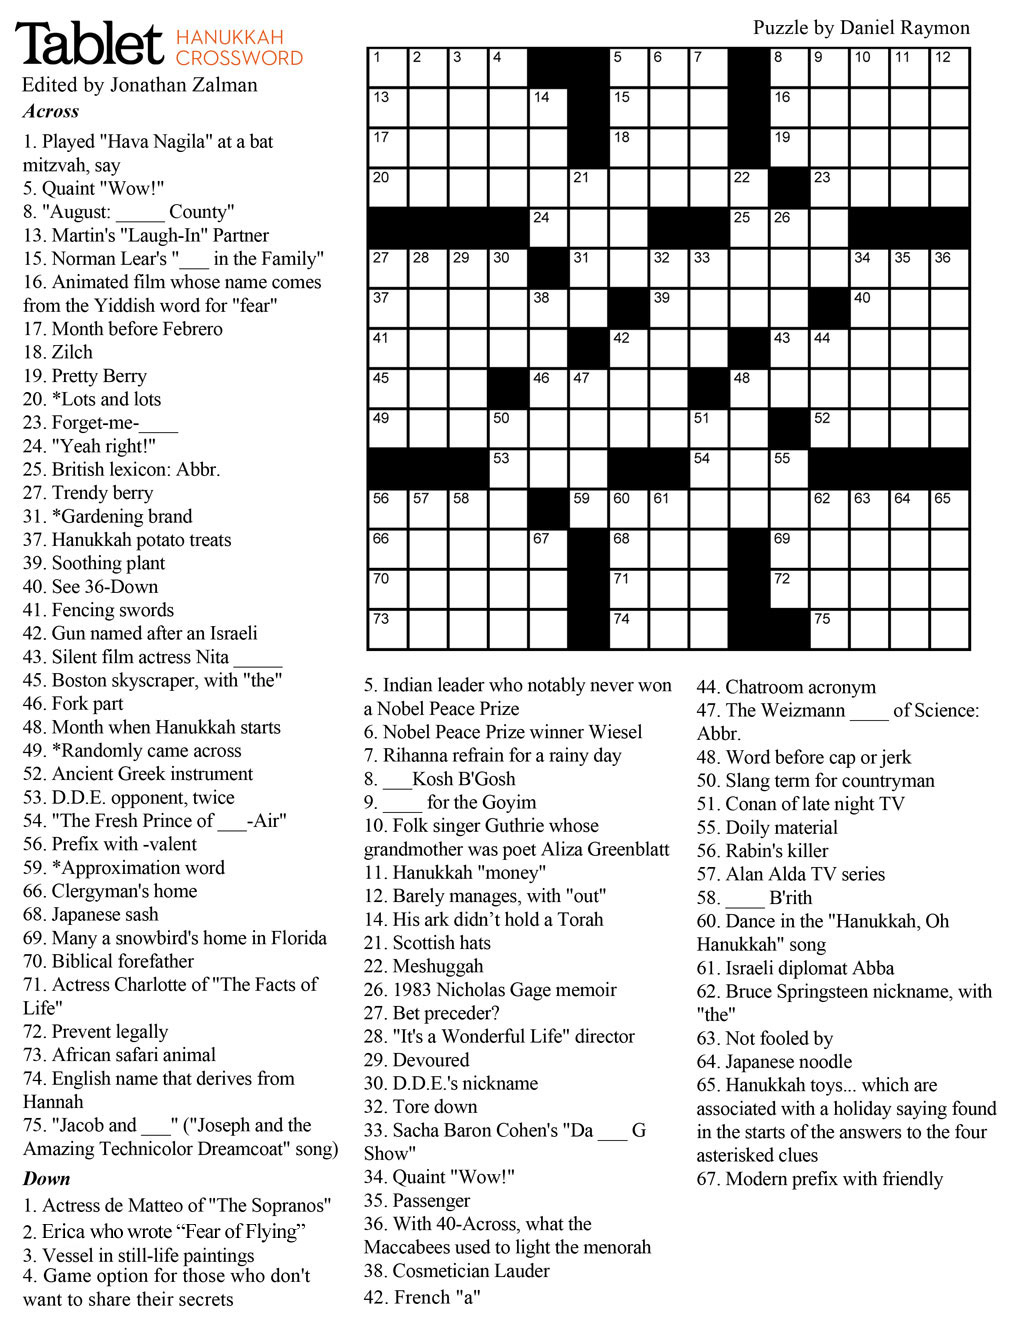 Wind Down With Our Hanukkah Crossword Puzzle! – Tablet Magazine - Printable Christmas Crossword Puzzle For Adults